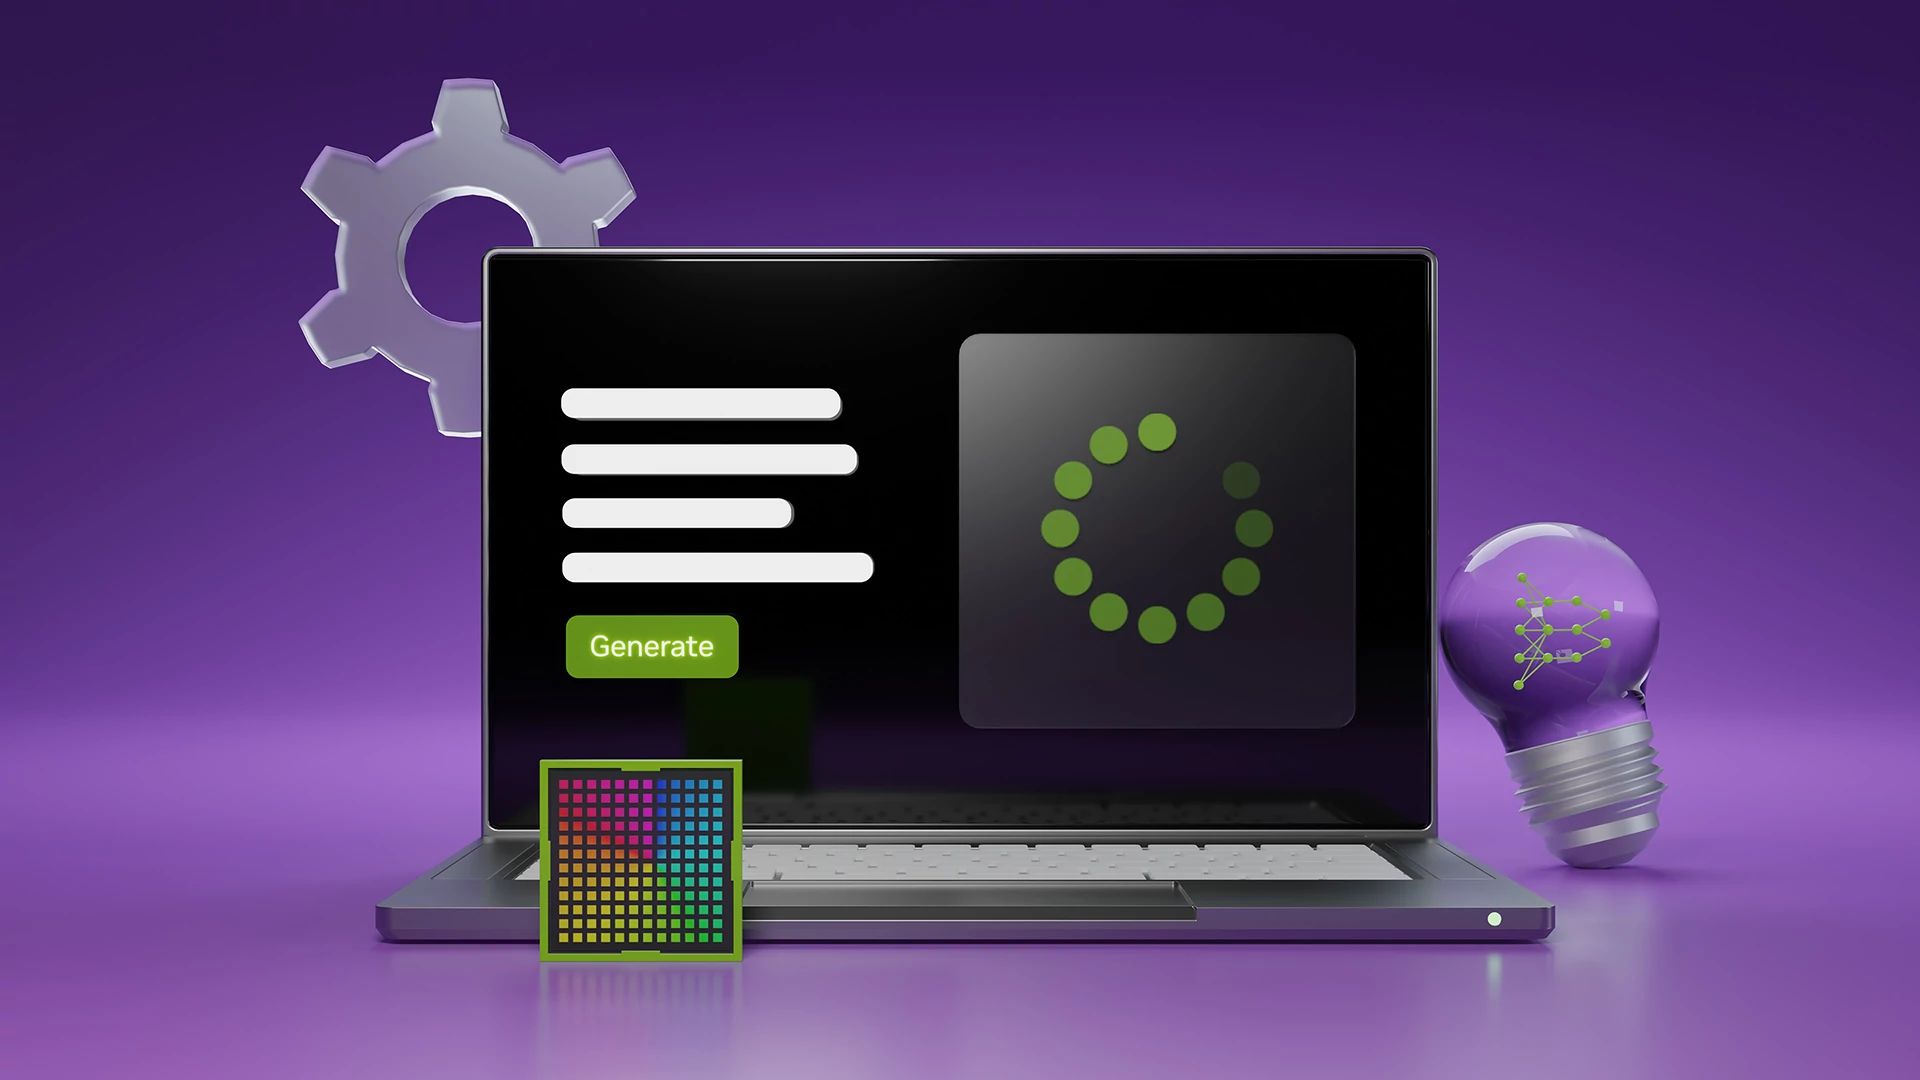 Decorative image of an open laptop with a lightbulb leaning on it, on a purple background.